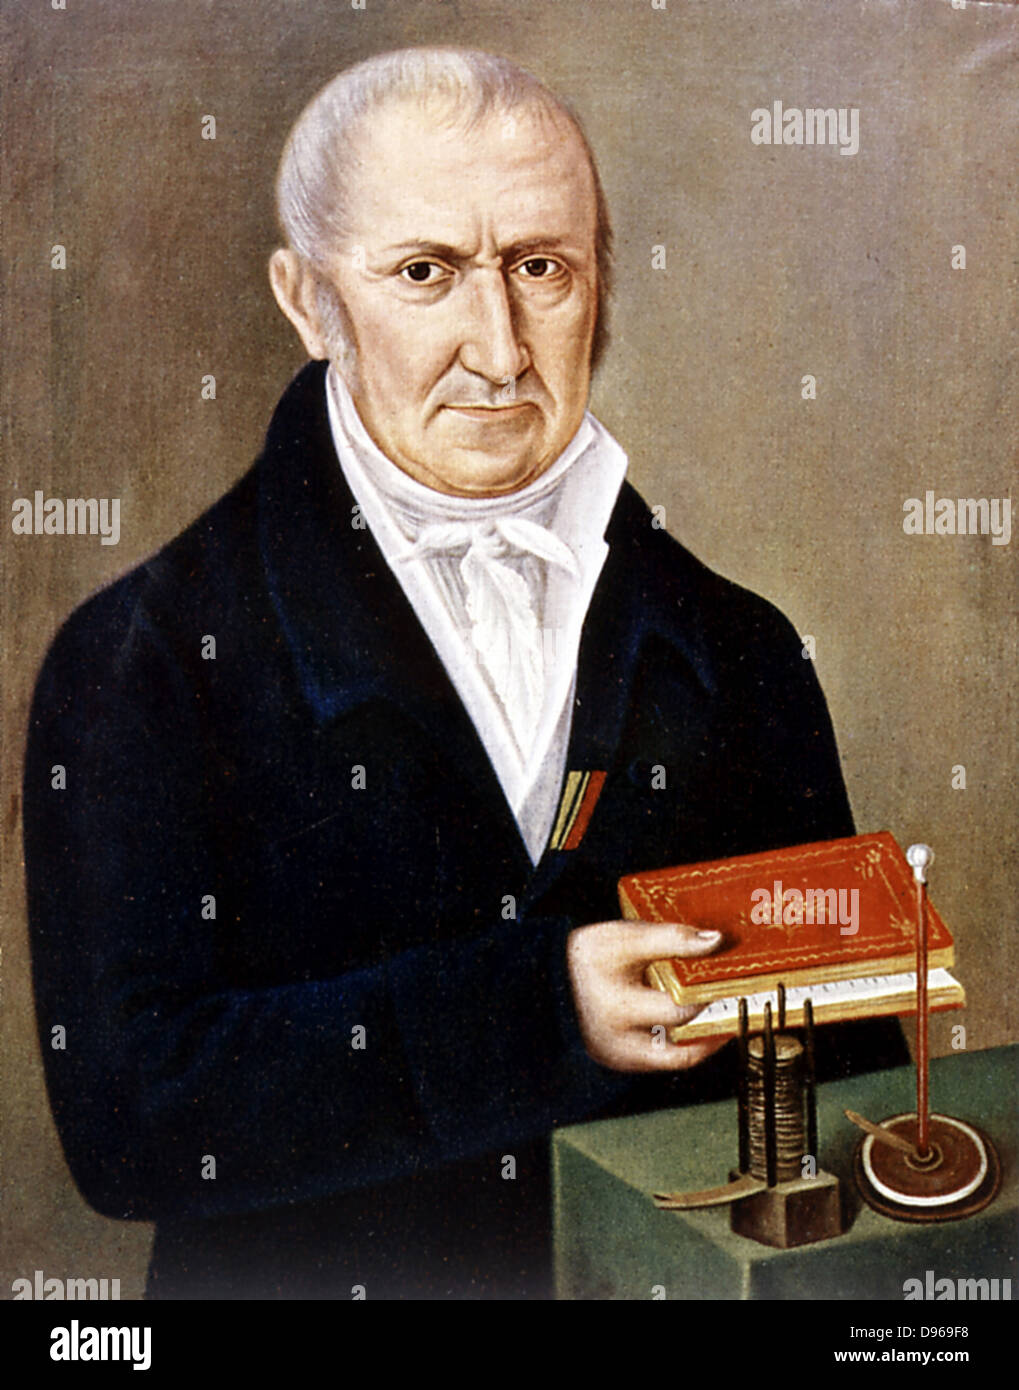 Alessandro Volta (1745-1827) Italian physicist. On table are two of his inventions, the Voltaic pile (wet battery) on left,  and electrophorus, an apparatus demonstrating electrostatic charge by induction. His name given to unit of electrical potential difference, Volt. Stock Photo